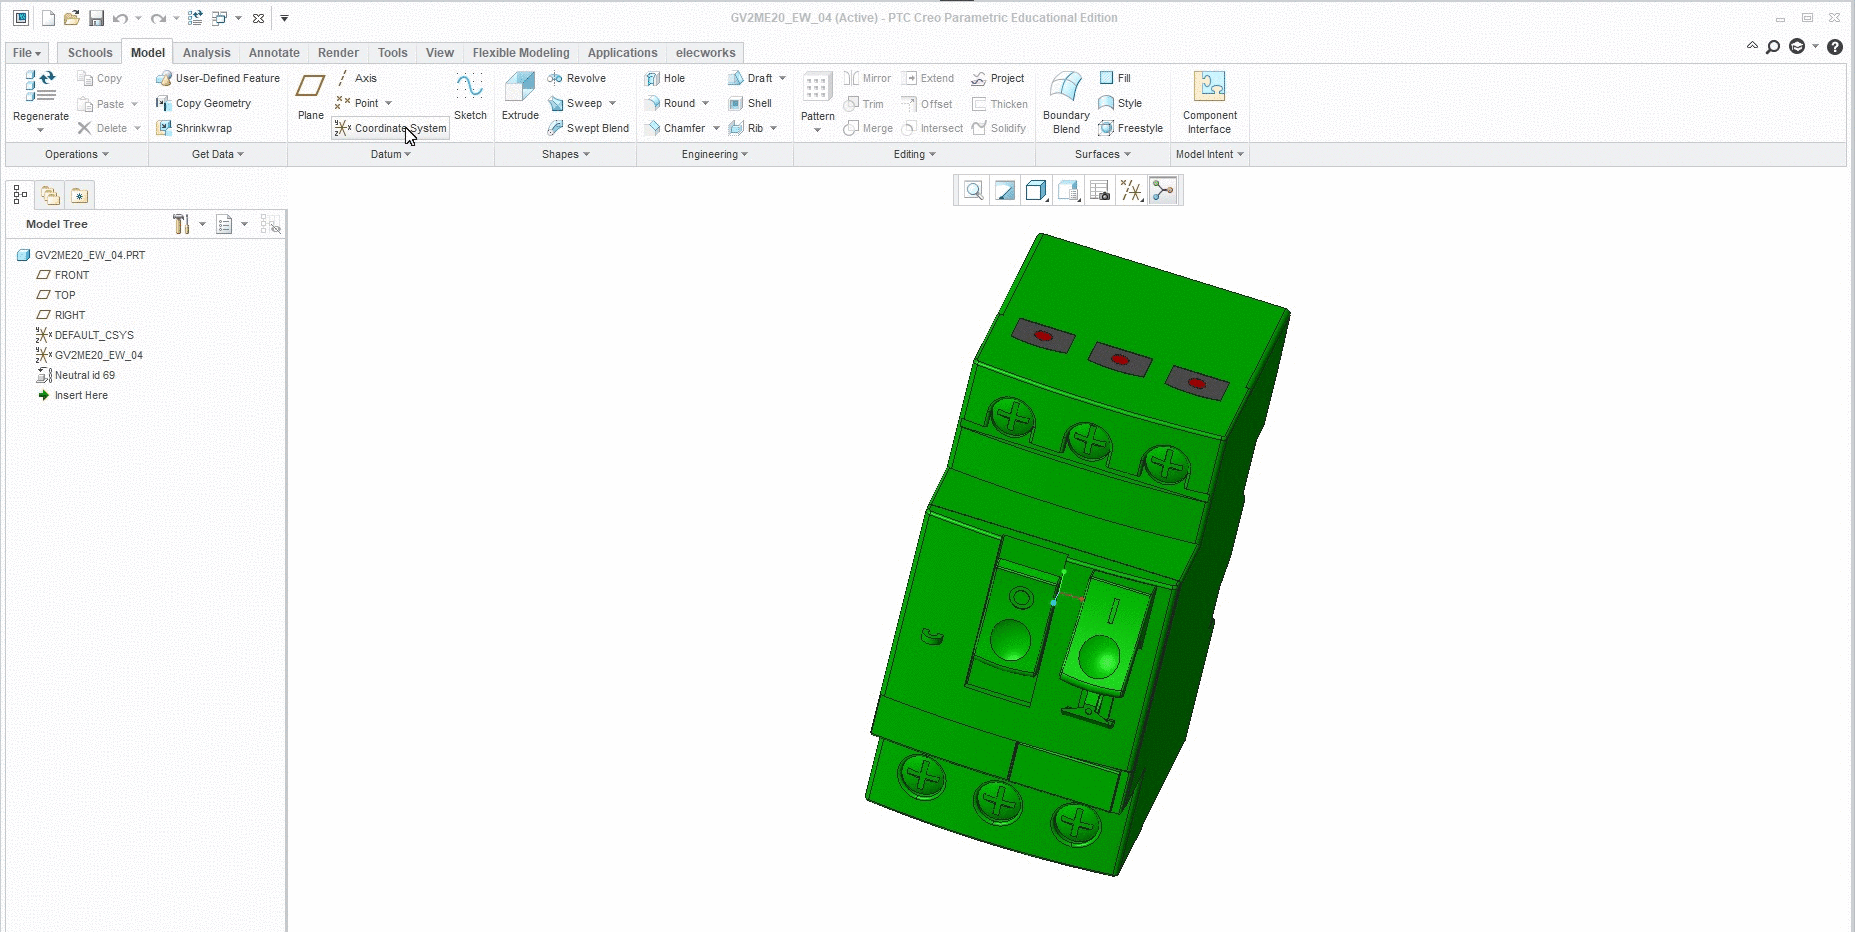 elecworks___Defining_An_Electrical_Connection_Point_For_A_PTC_Creo_Part.gif